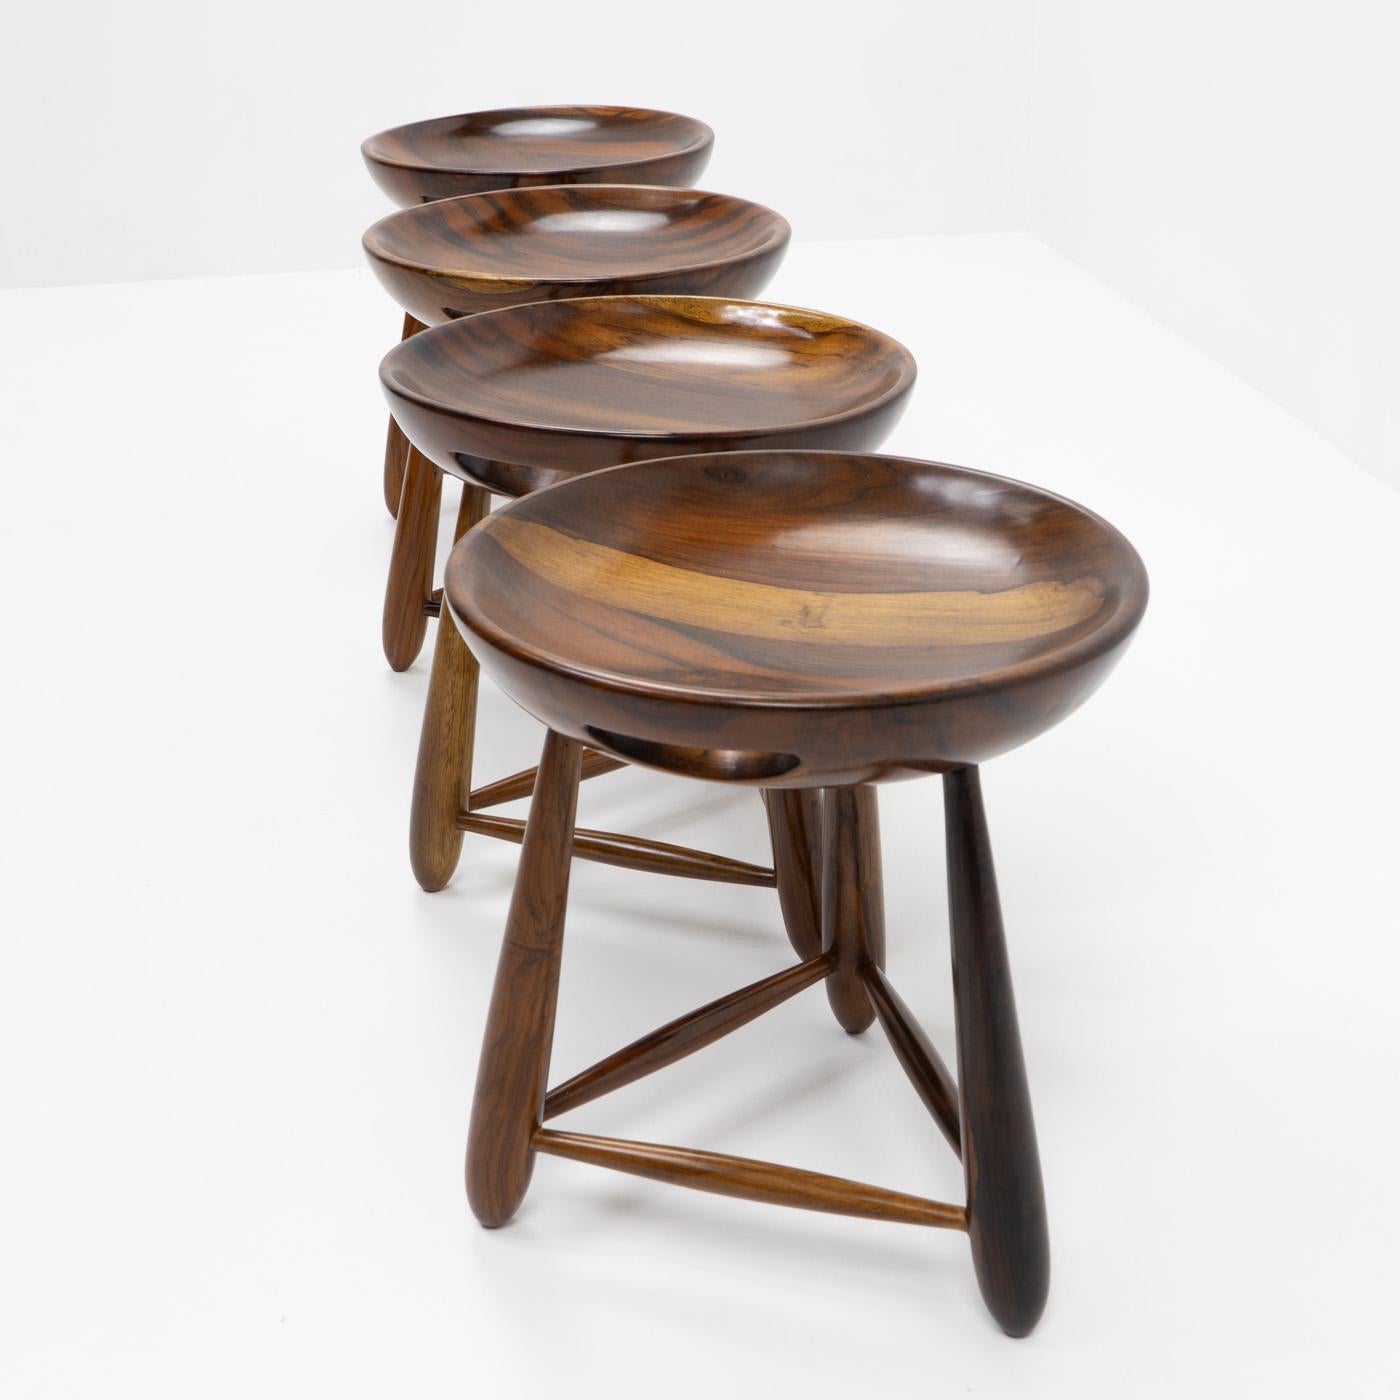 Mid-20th Century Original Brazilian Mocho Stools by Sergio Rodrigues for OCA, 1950s For Sale